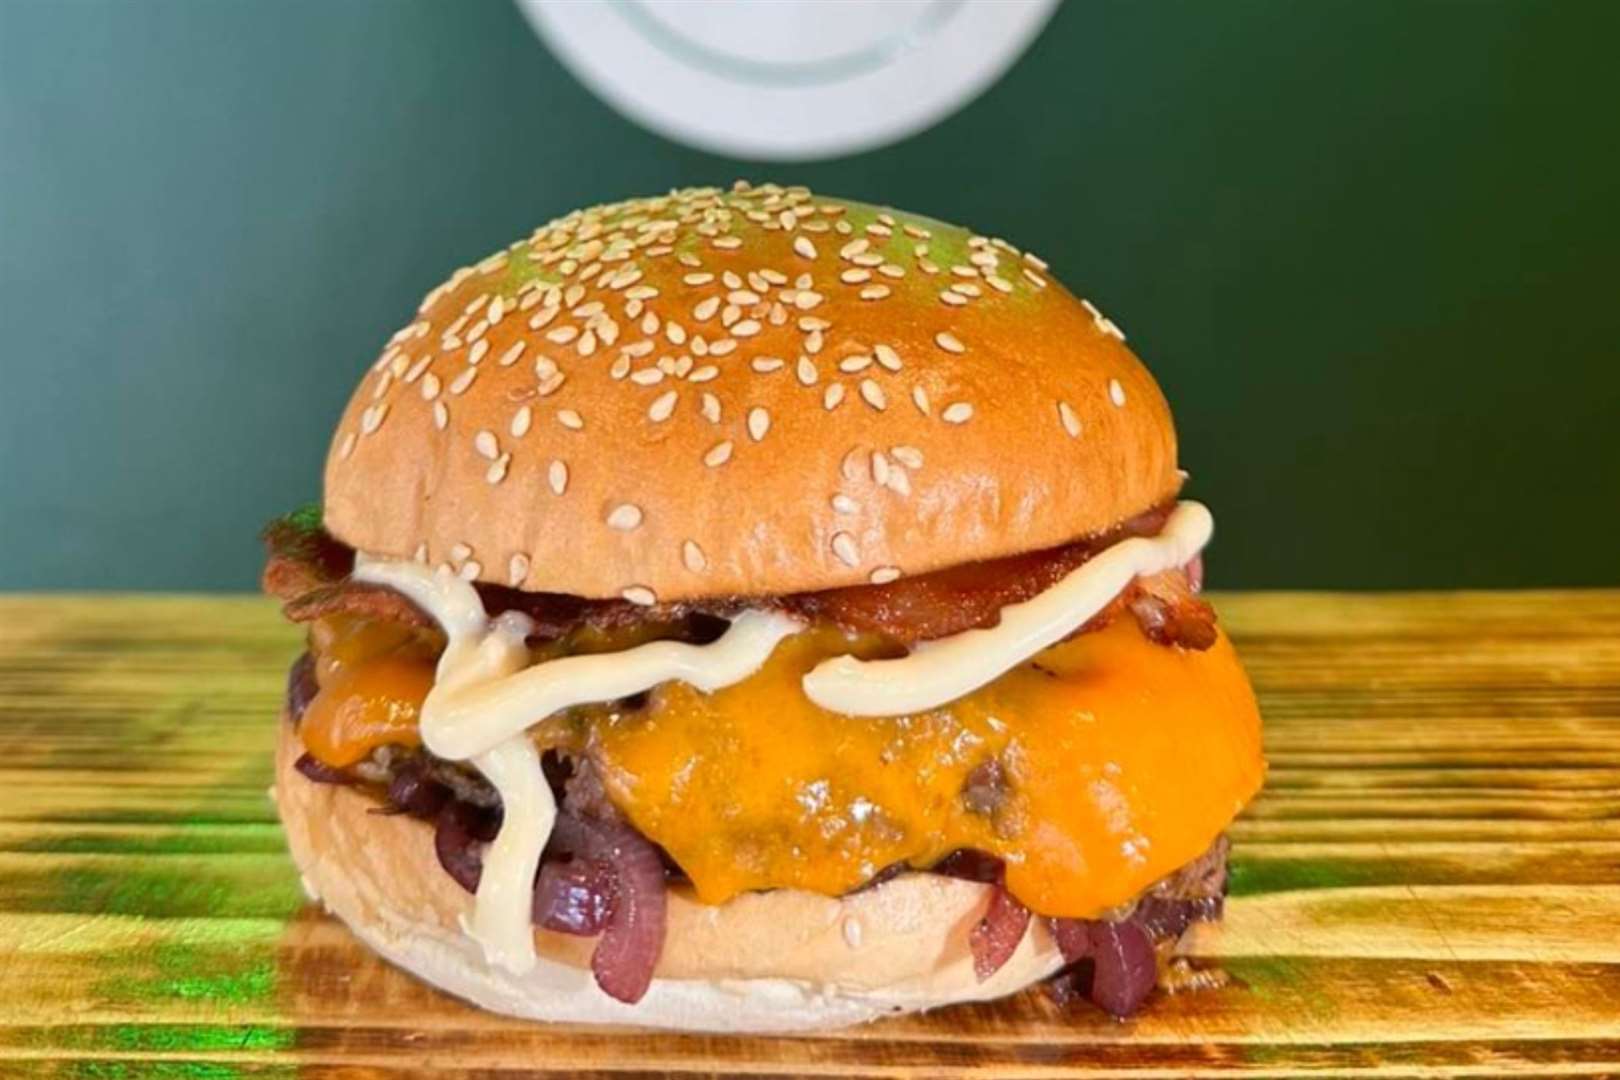 The Limitless burger is up against 15 others for the National Burger Awards. Photo: Please Sir! [IG]